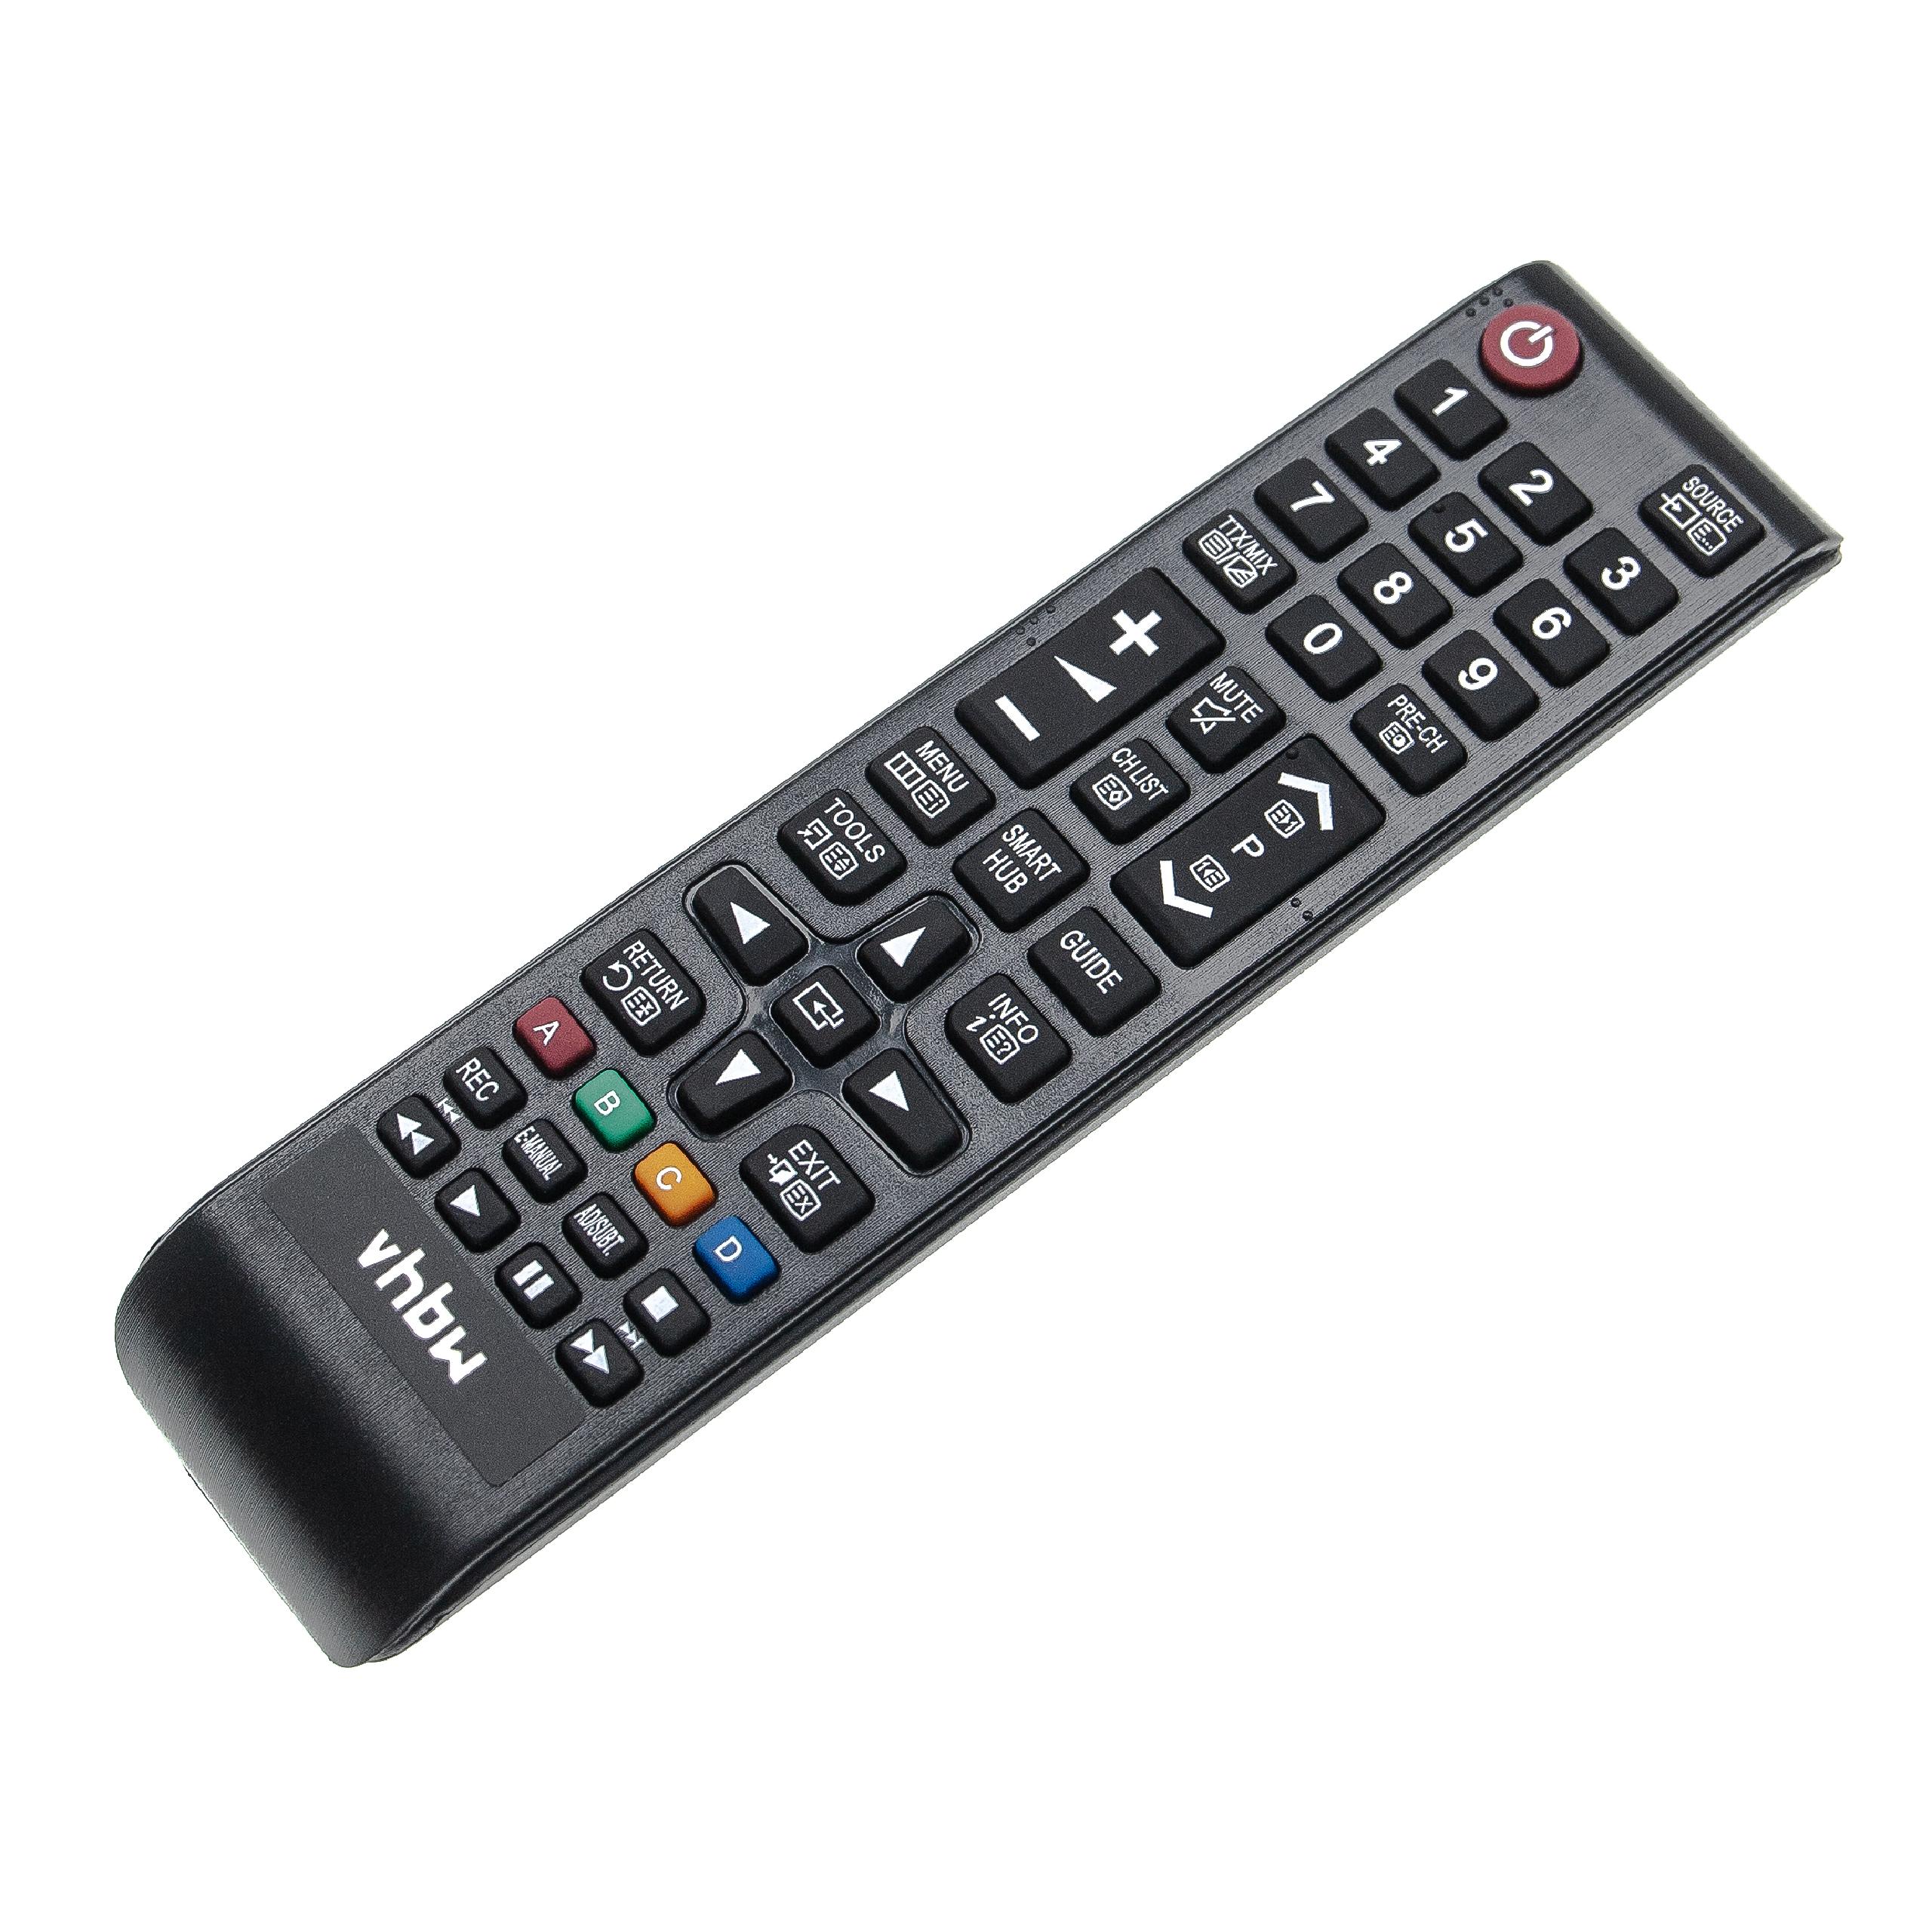  multi-function remote control suitable for Samsung B Series TV